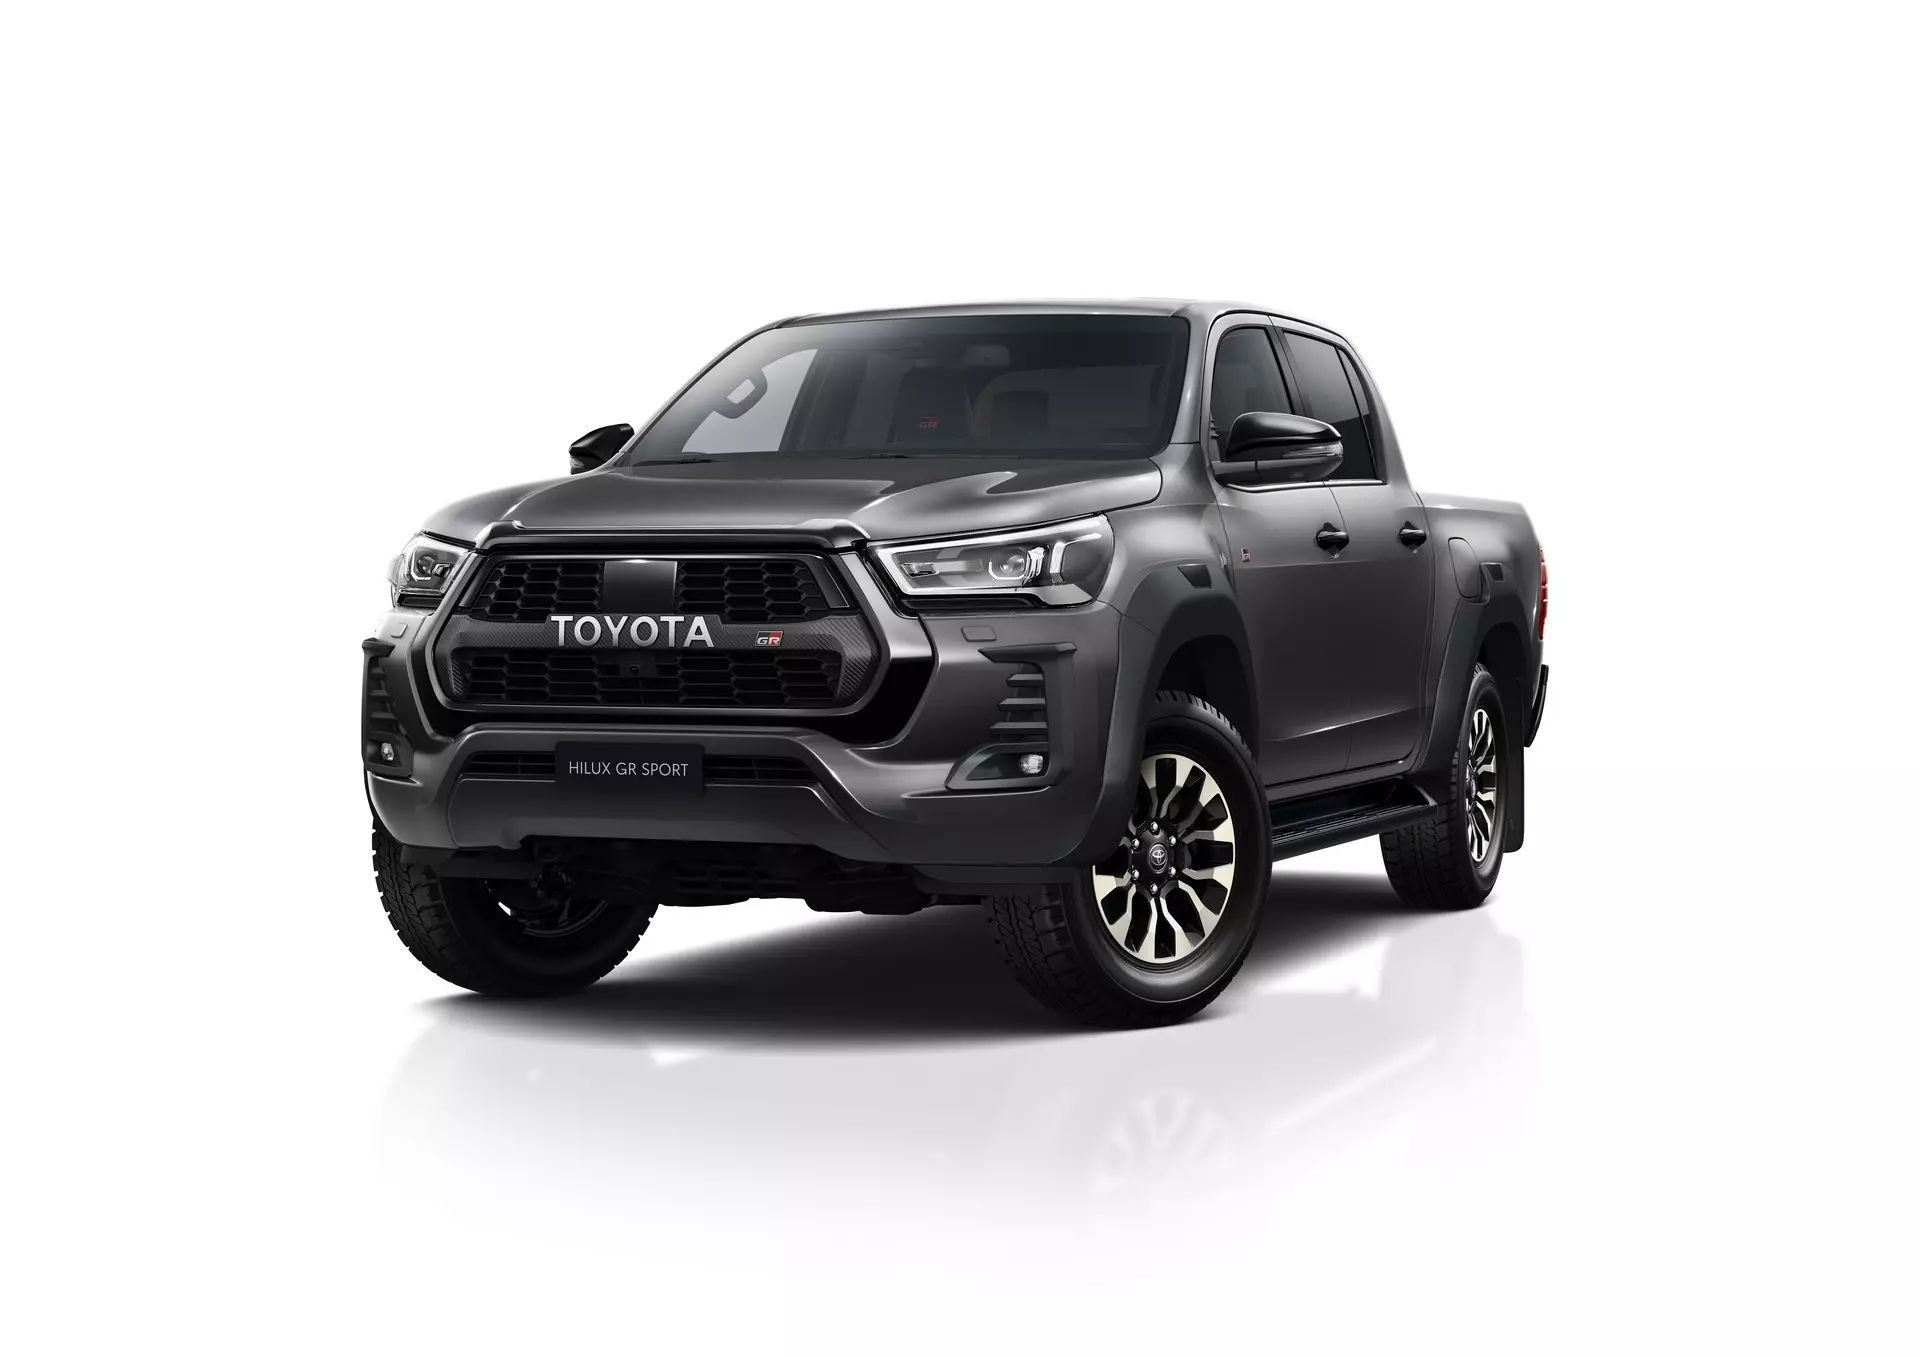 2022-2023 Toyota Hilux GR Sport: Price and Features